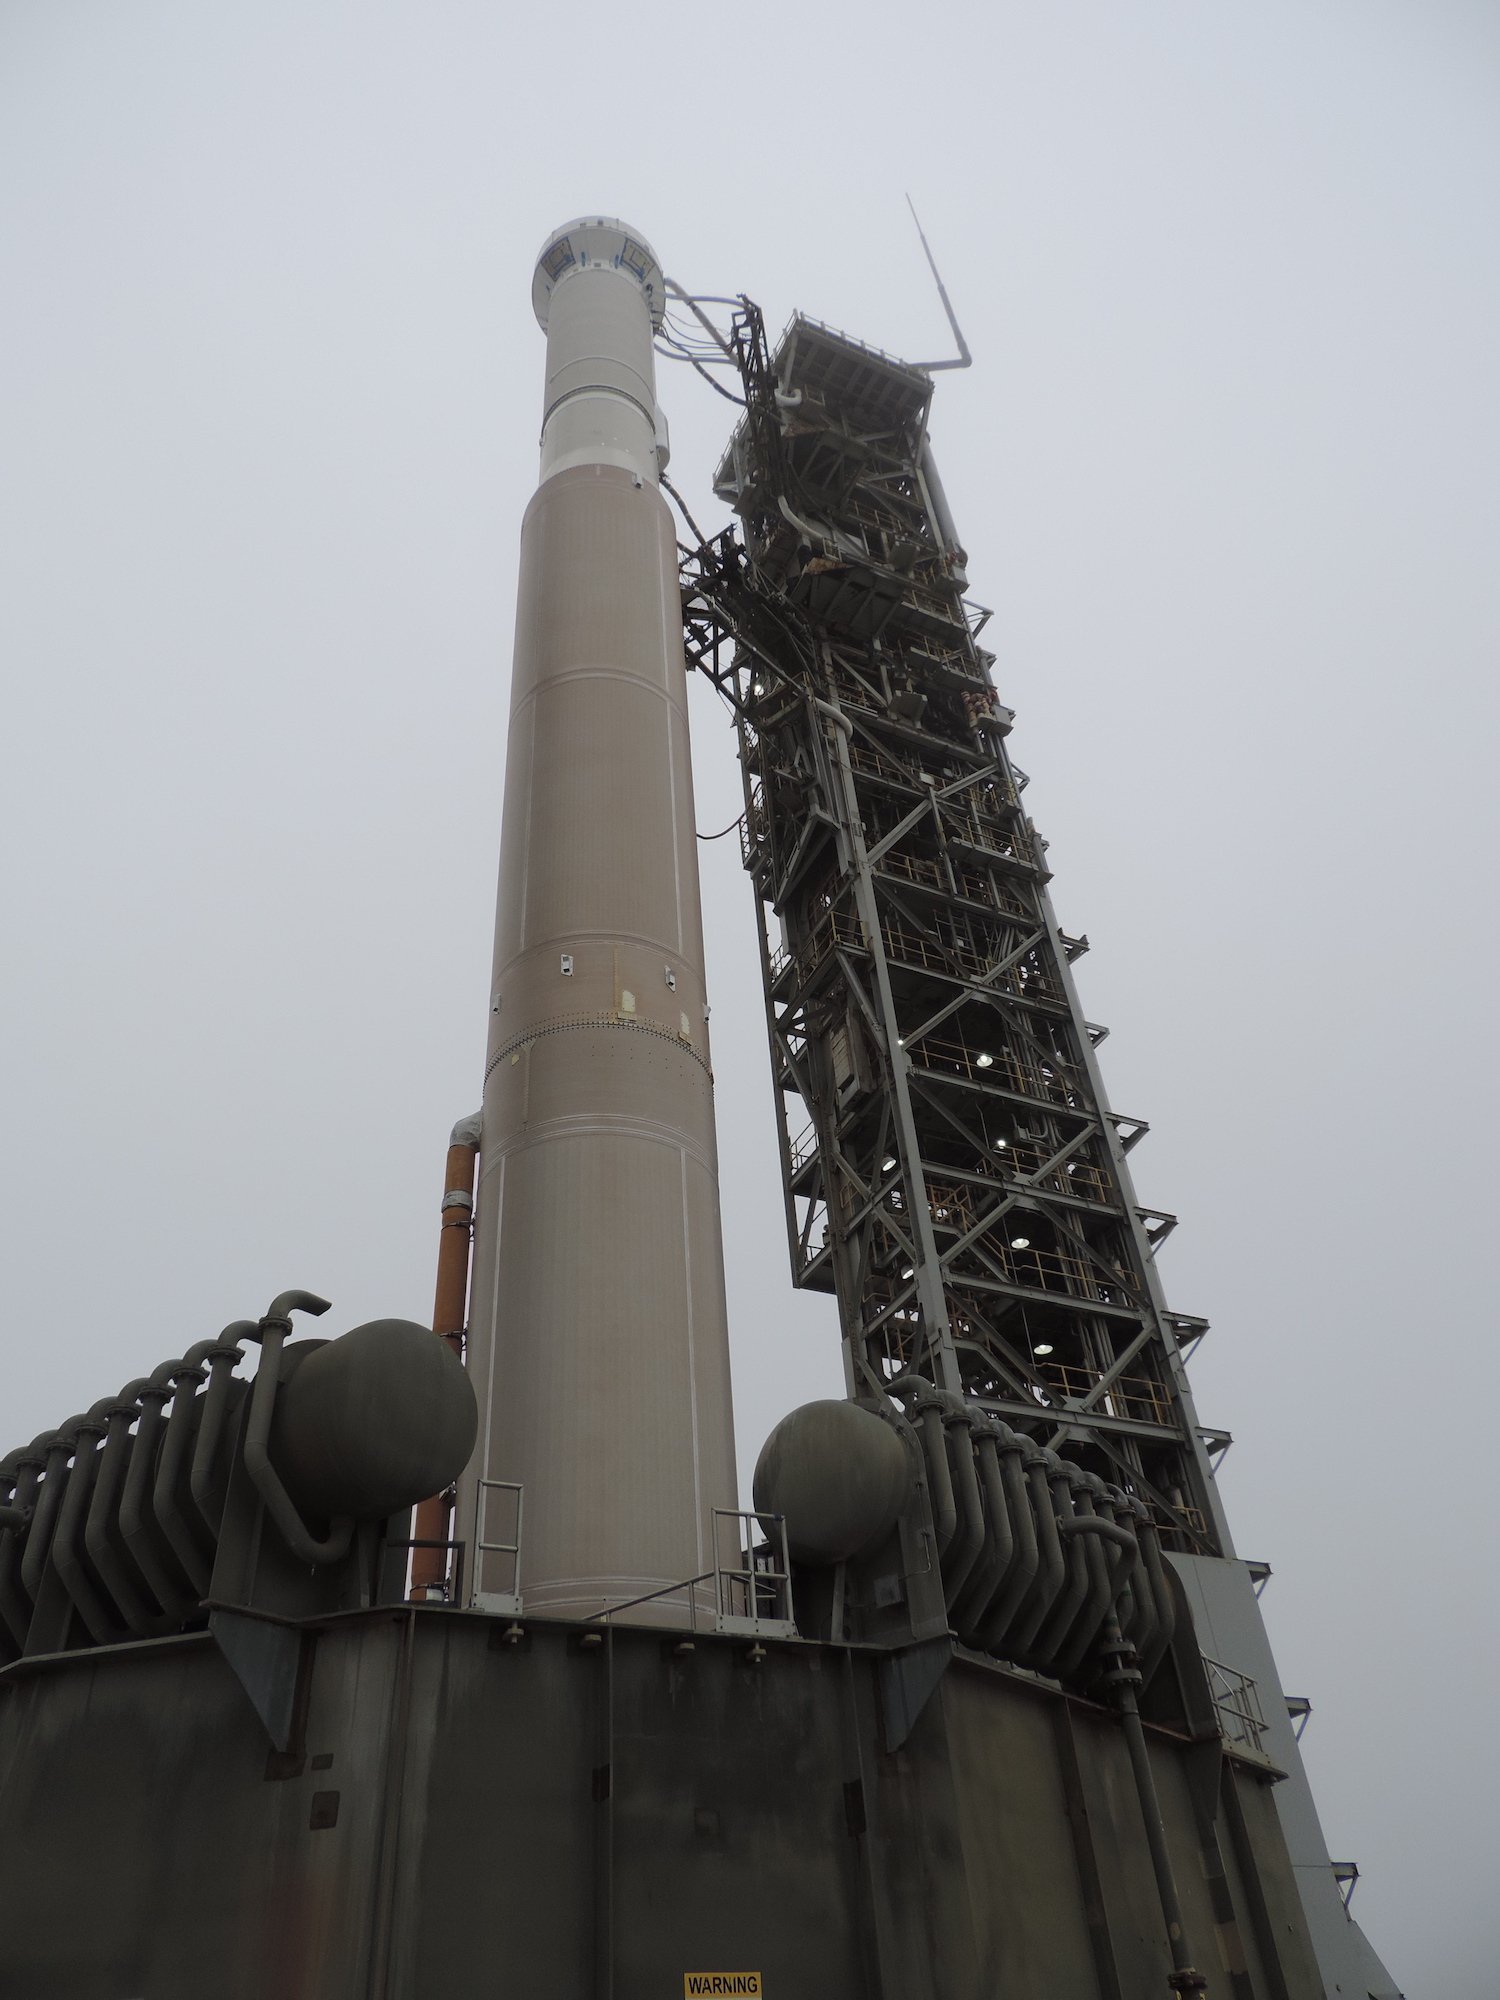 The Atlas V rocket undergoes WDR for the Landsat 9 mission. Photo by United Launch Alliance